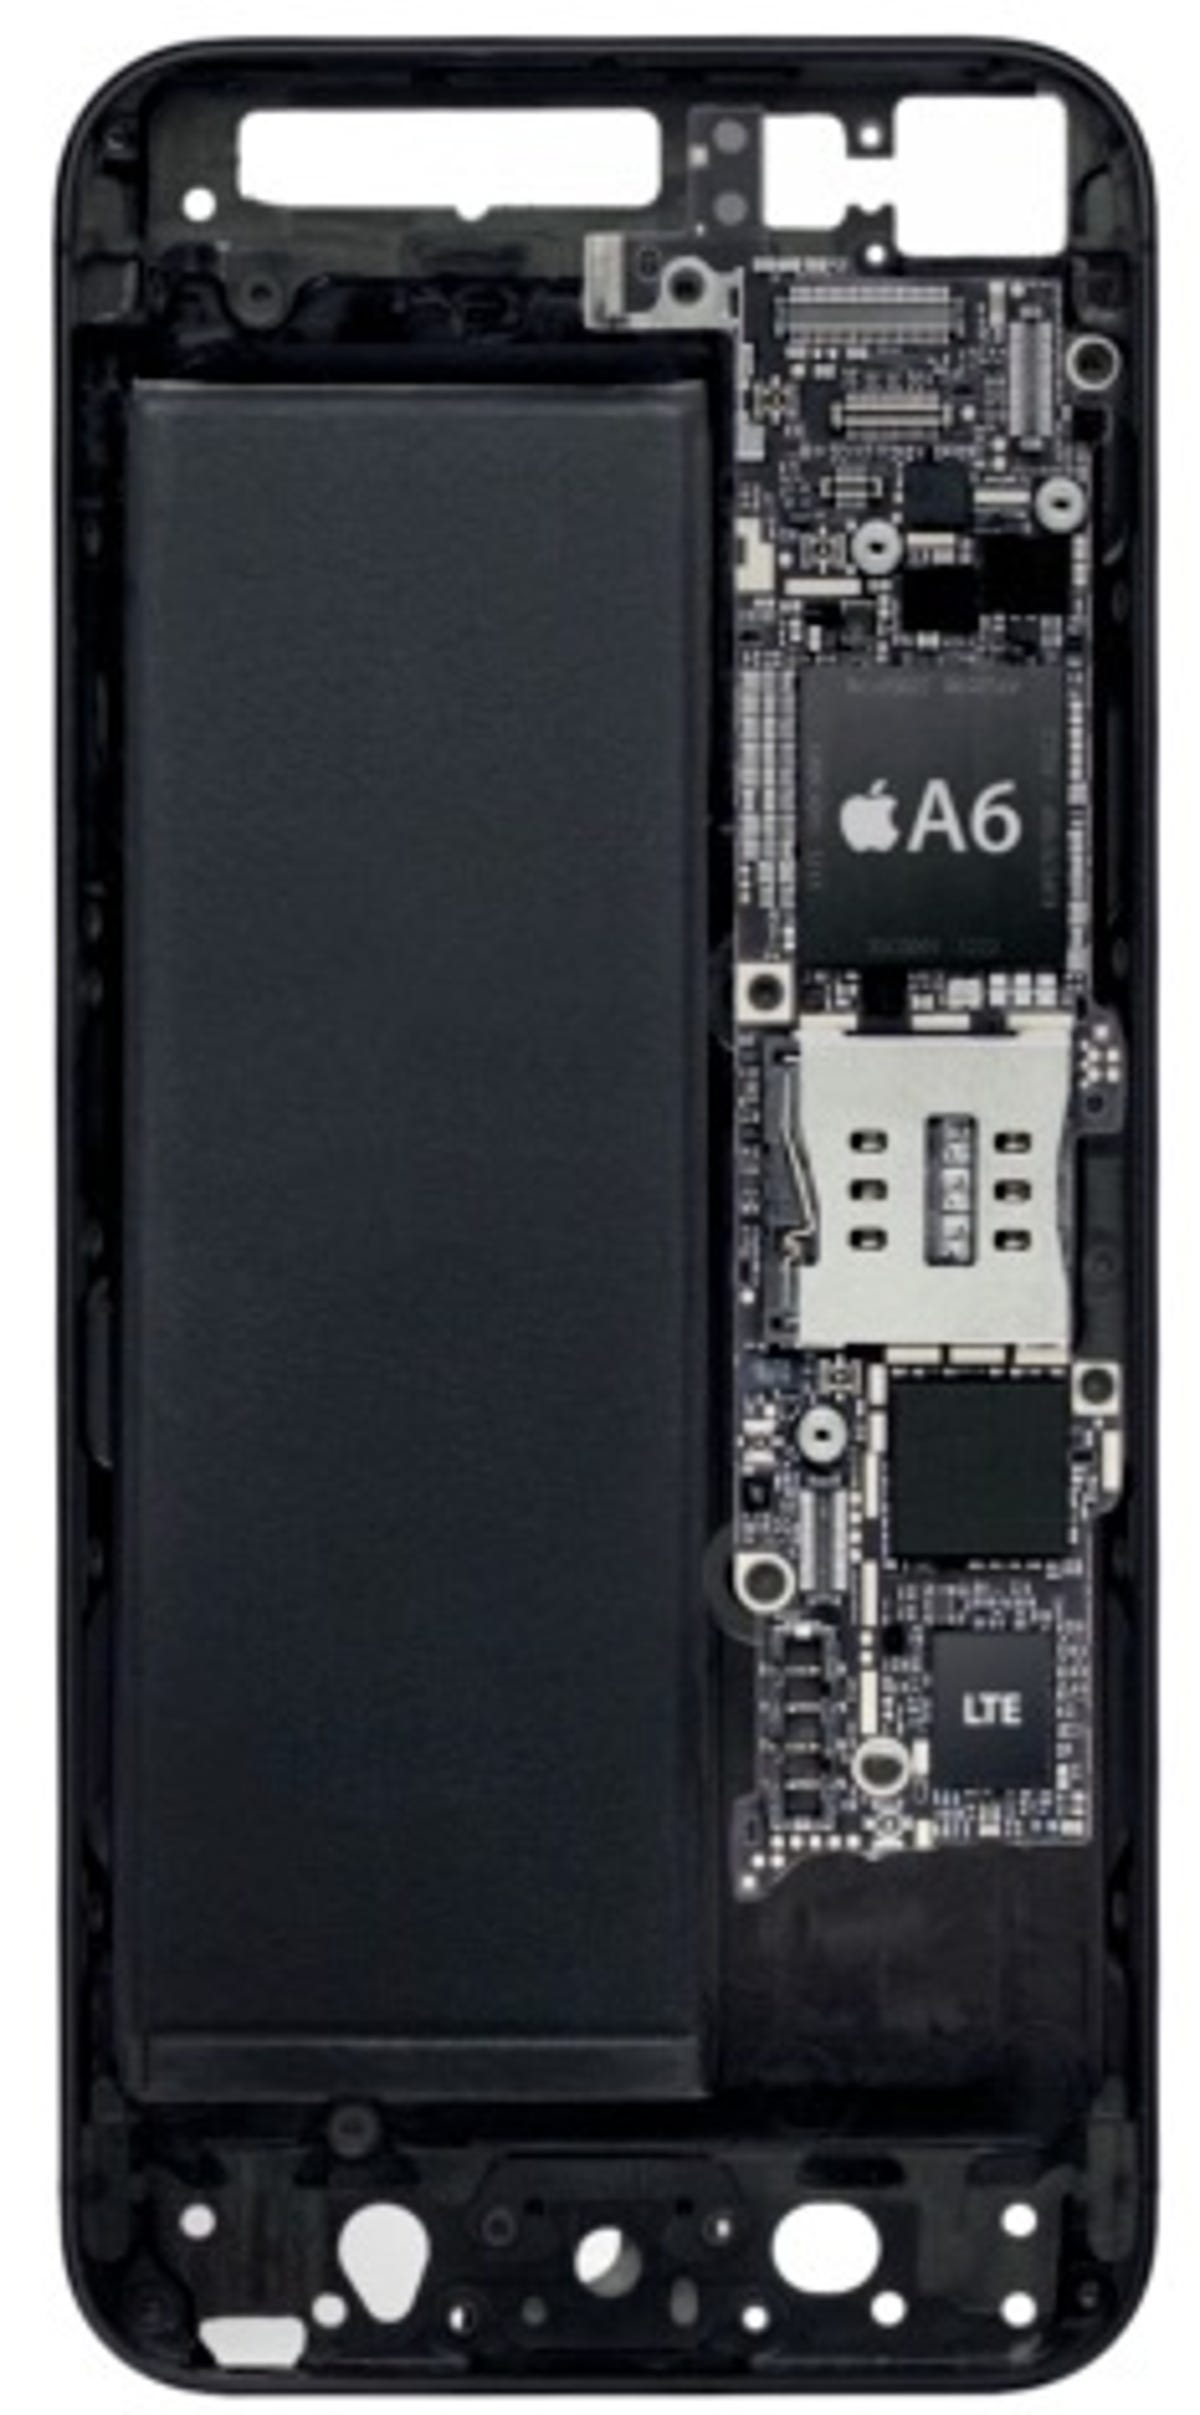 The Apple A6 chip.  The combo CDMA-LTE Qualcomm chip is at bottom.